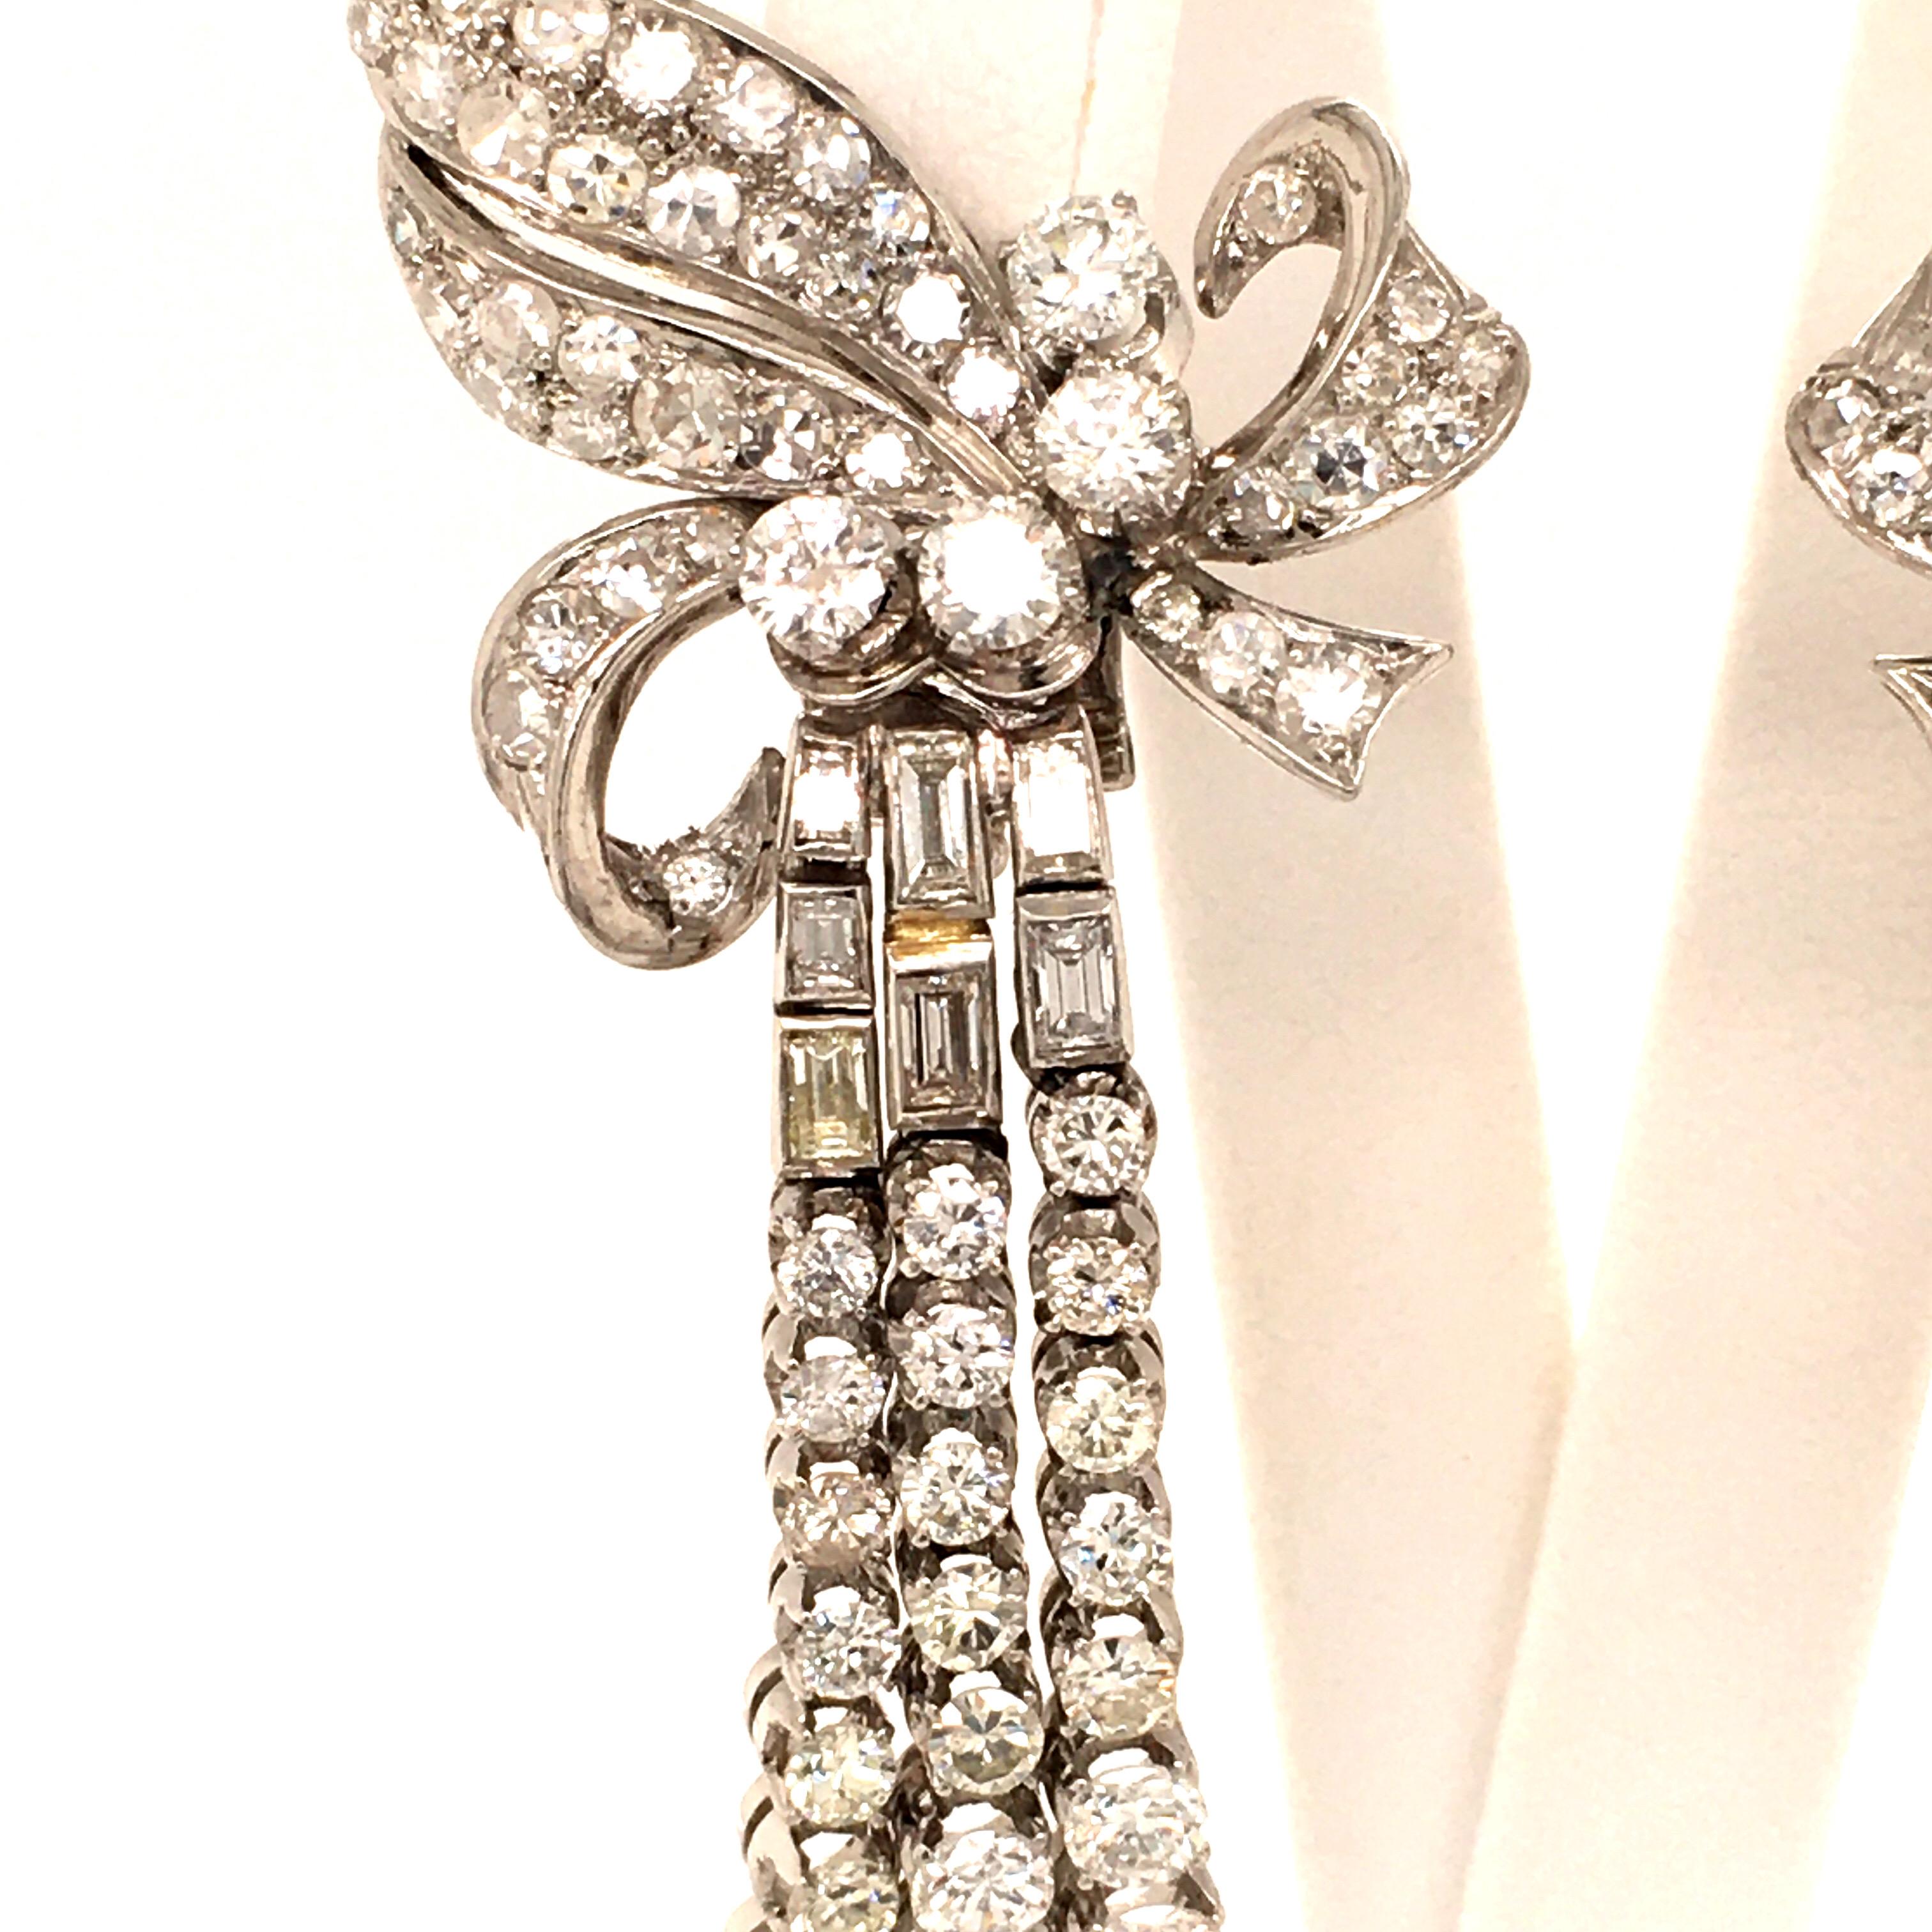 Spectacular Diamond Earclips in 14 Karat White Gold and Platinum 1